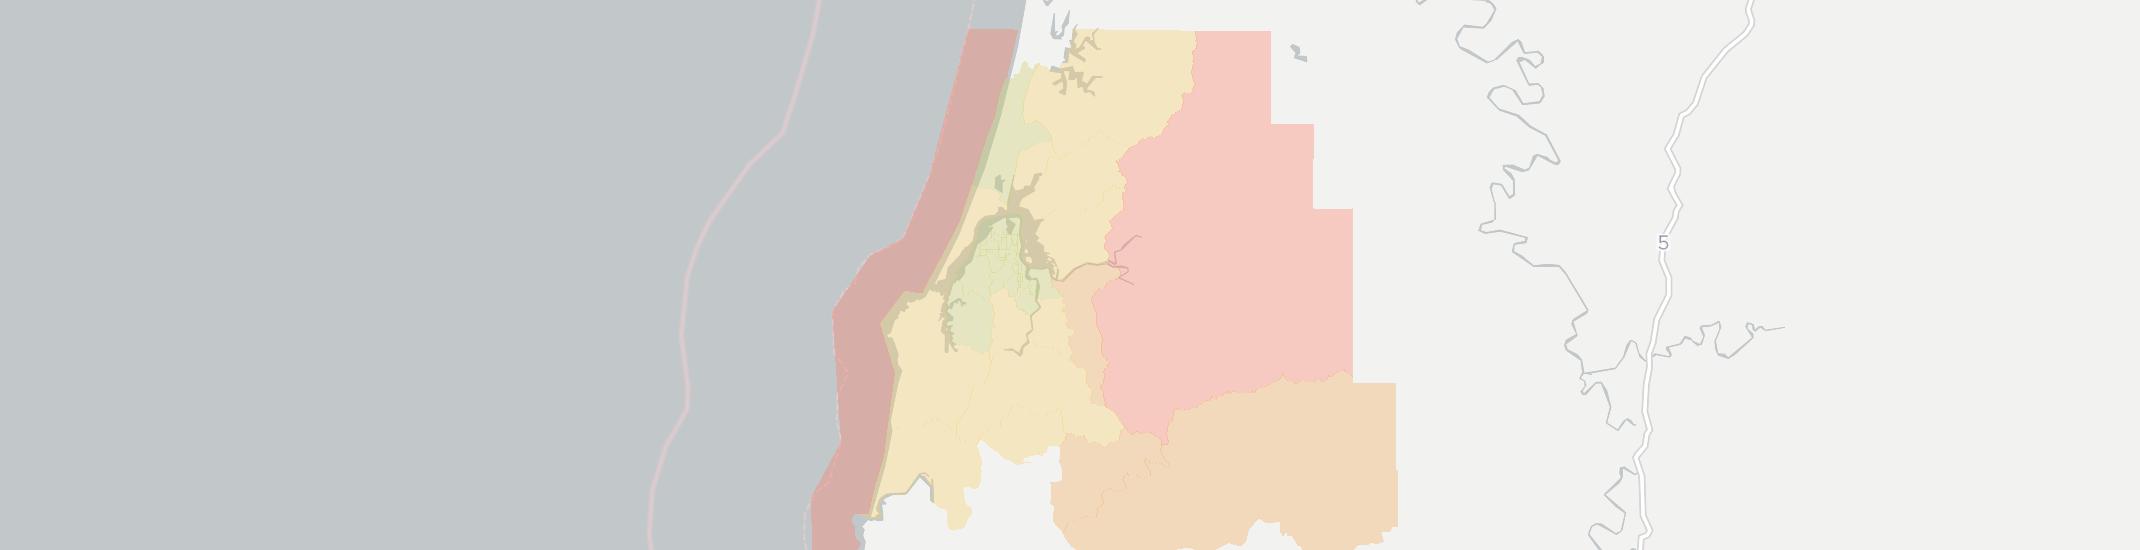 Coos Bay Internet Competition Map. Click for interactive map